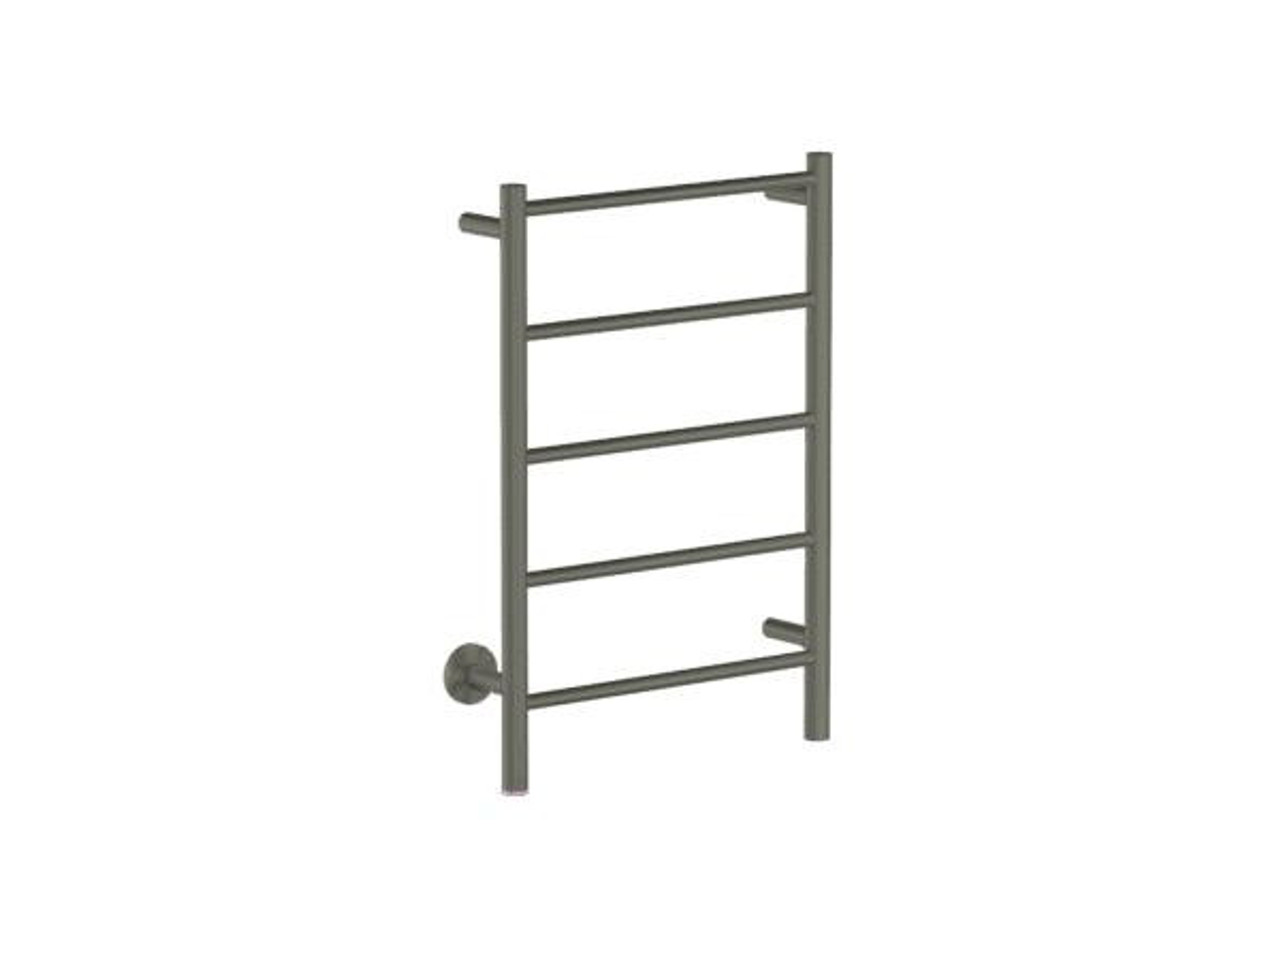 357020 Bathroom Butler Natural 5 Bar 500mm Straight Heated Towel Rail with PTSelect Switch Gunmetal PVD NAT05221-PTS-FBGM